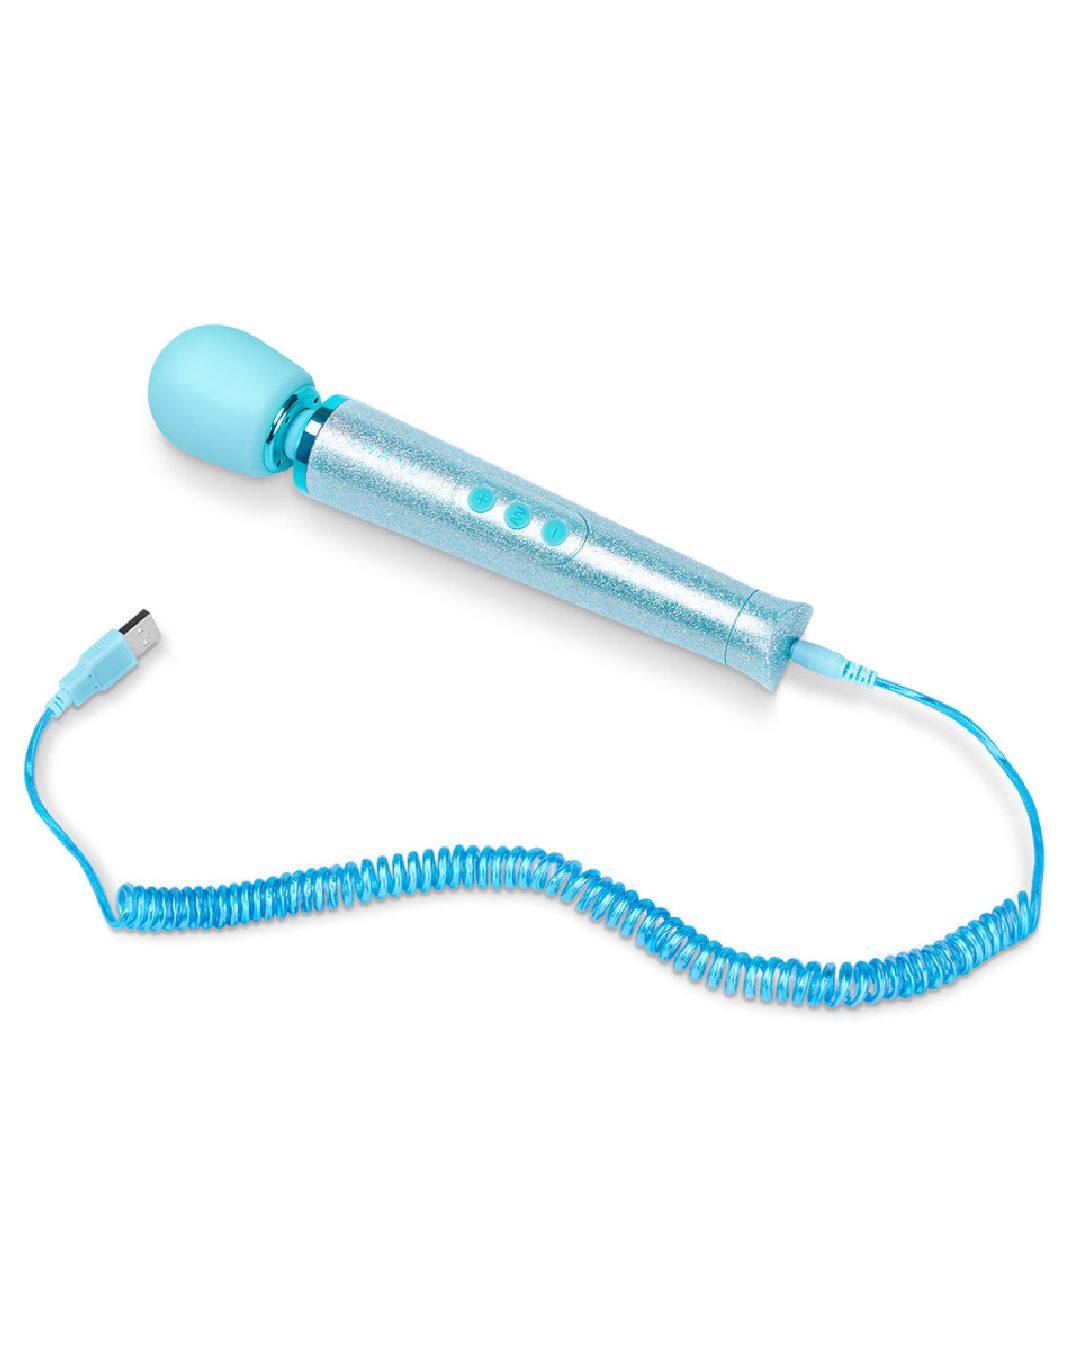 Le Wand All That Glimmers Wand Vibrator Set - Blue wand and cord 